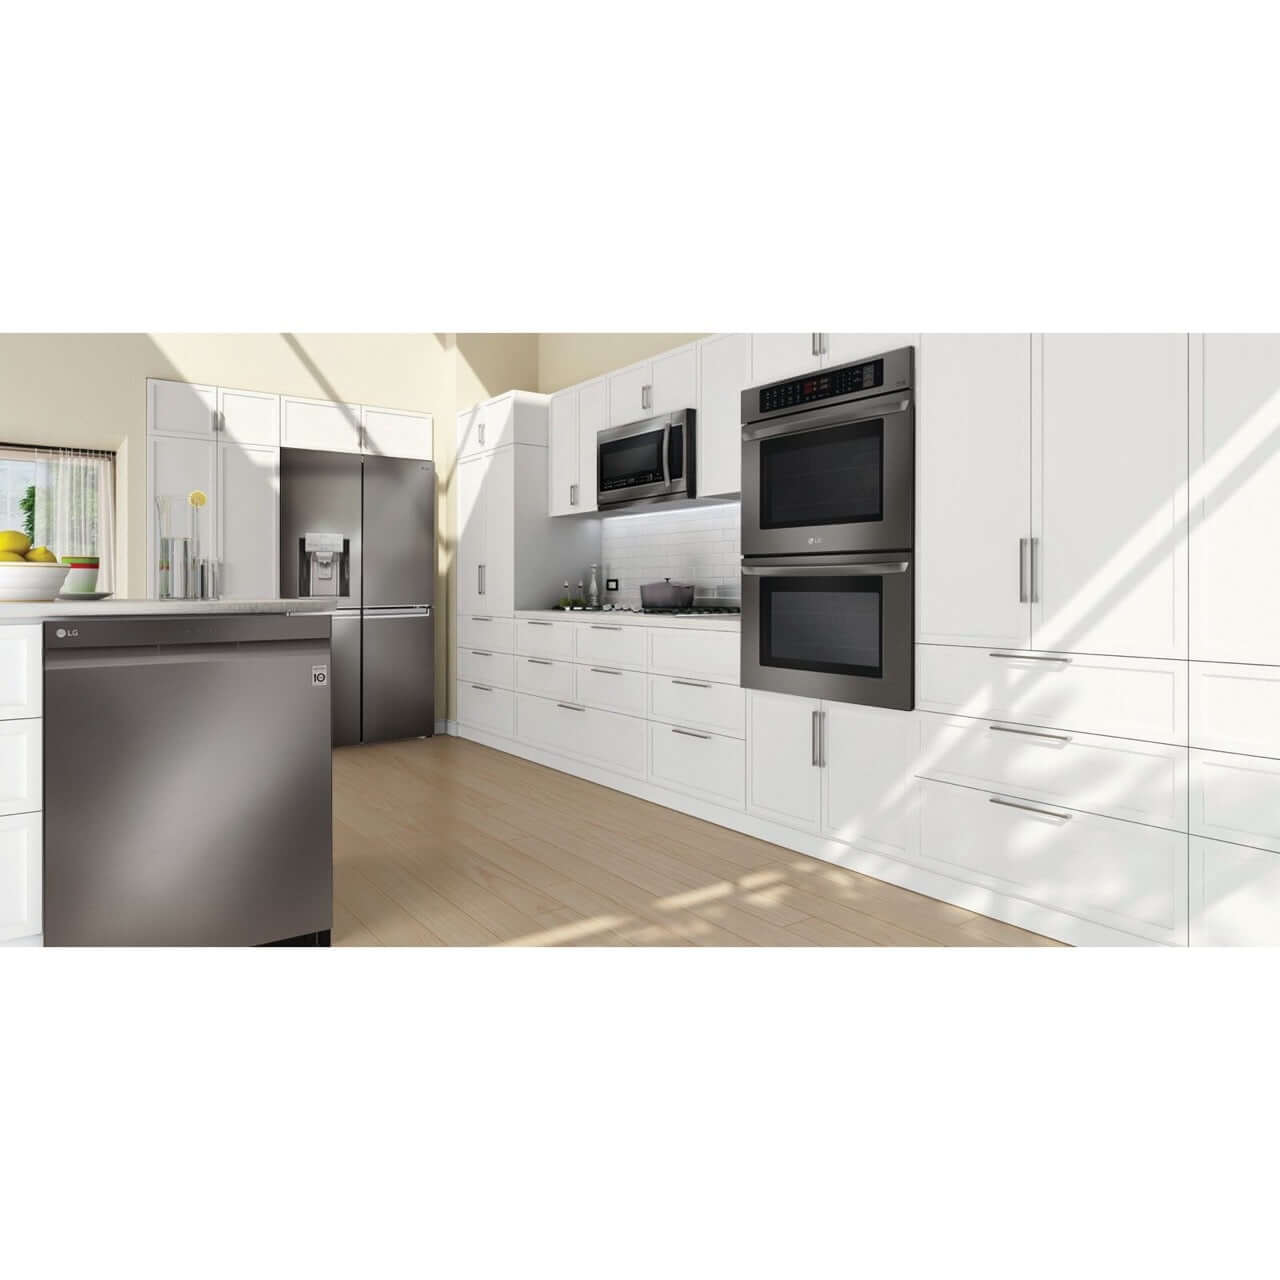 LG 30 in. Electric Double Wall Oven with True Convection in Black Stainless Steel (LWD3063BD)